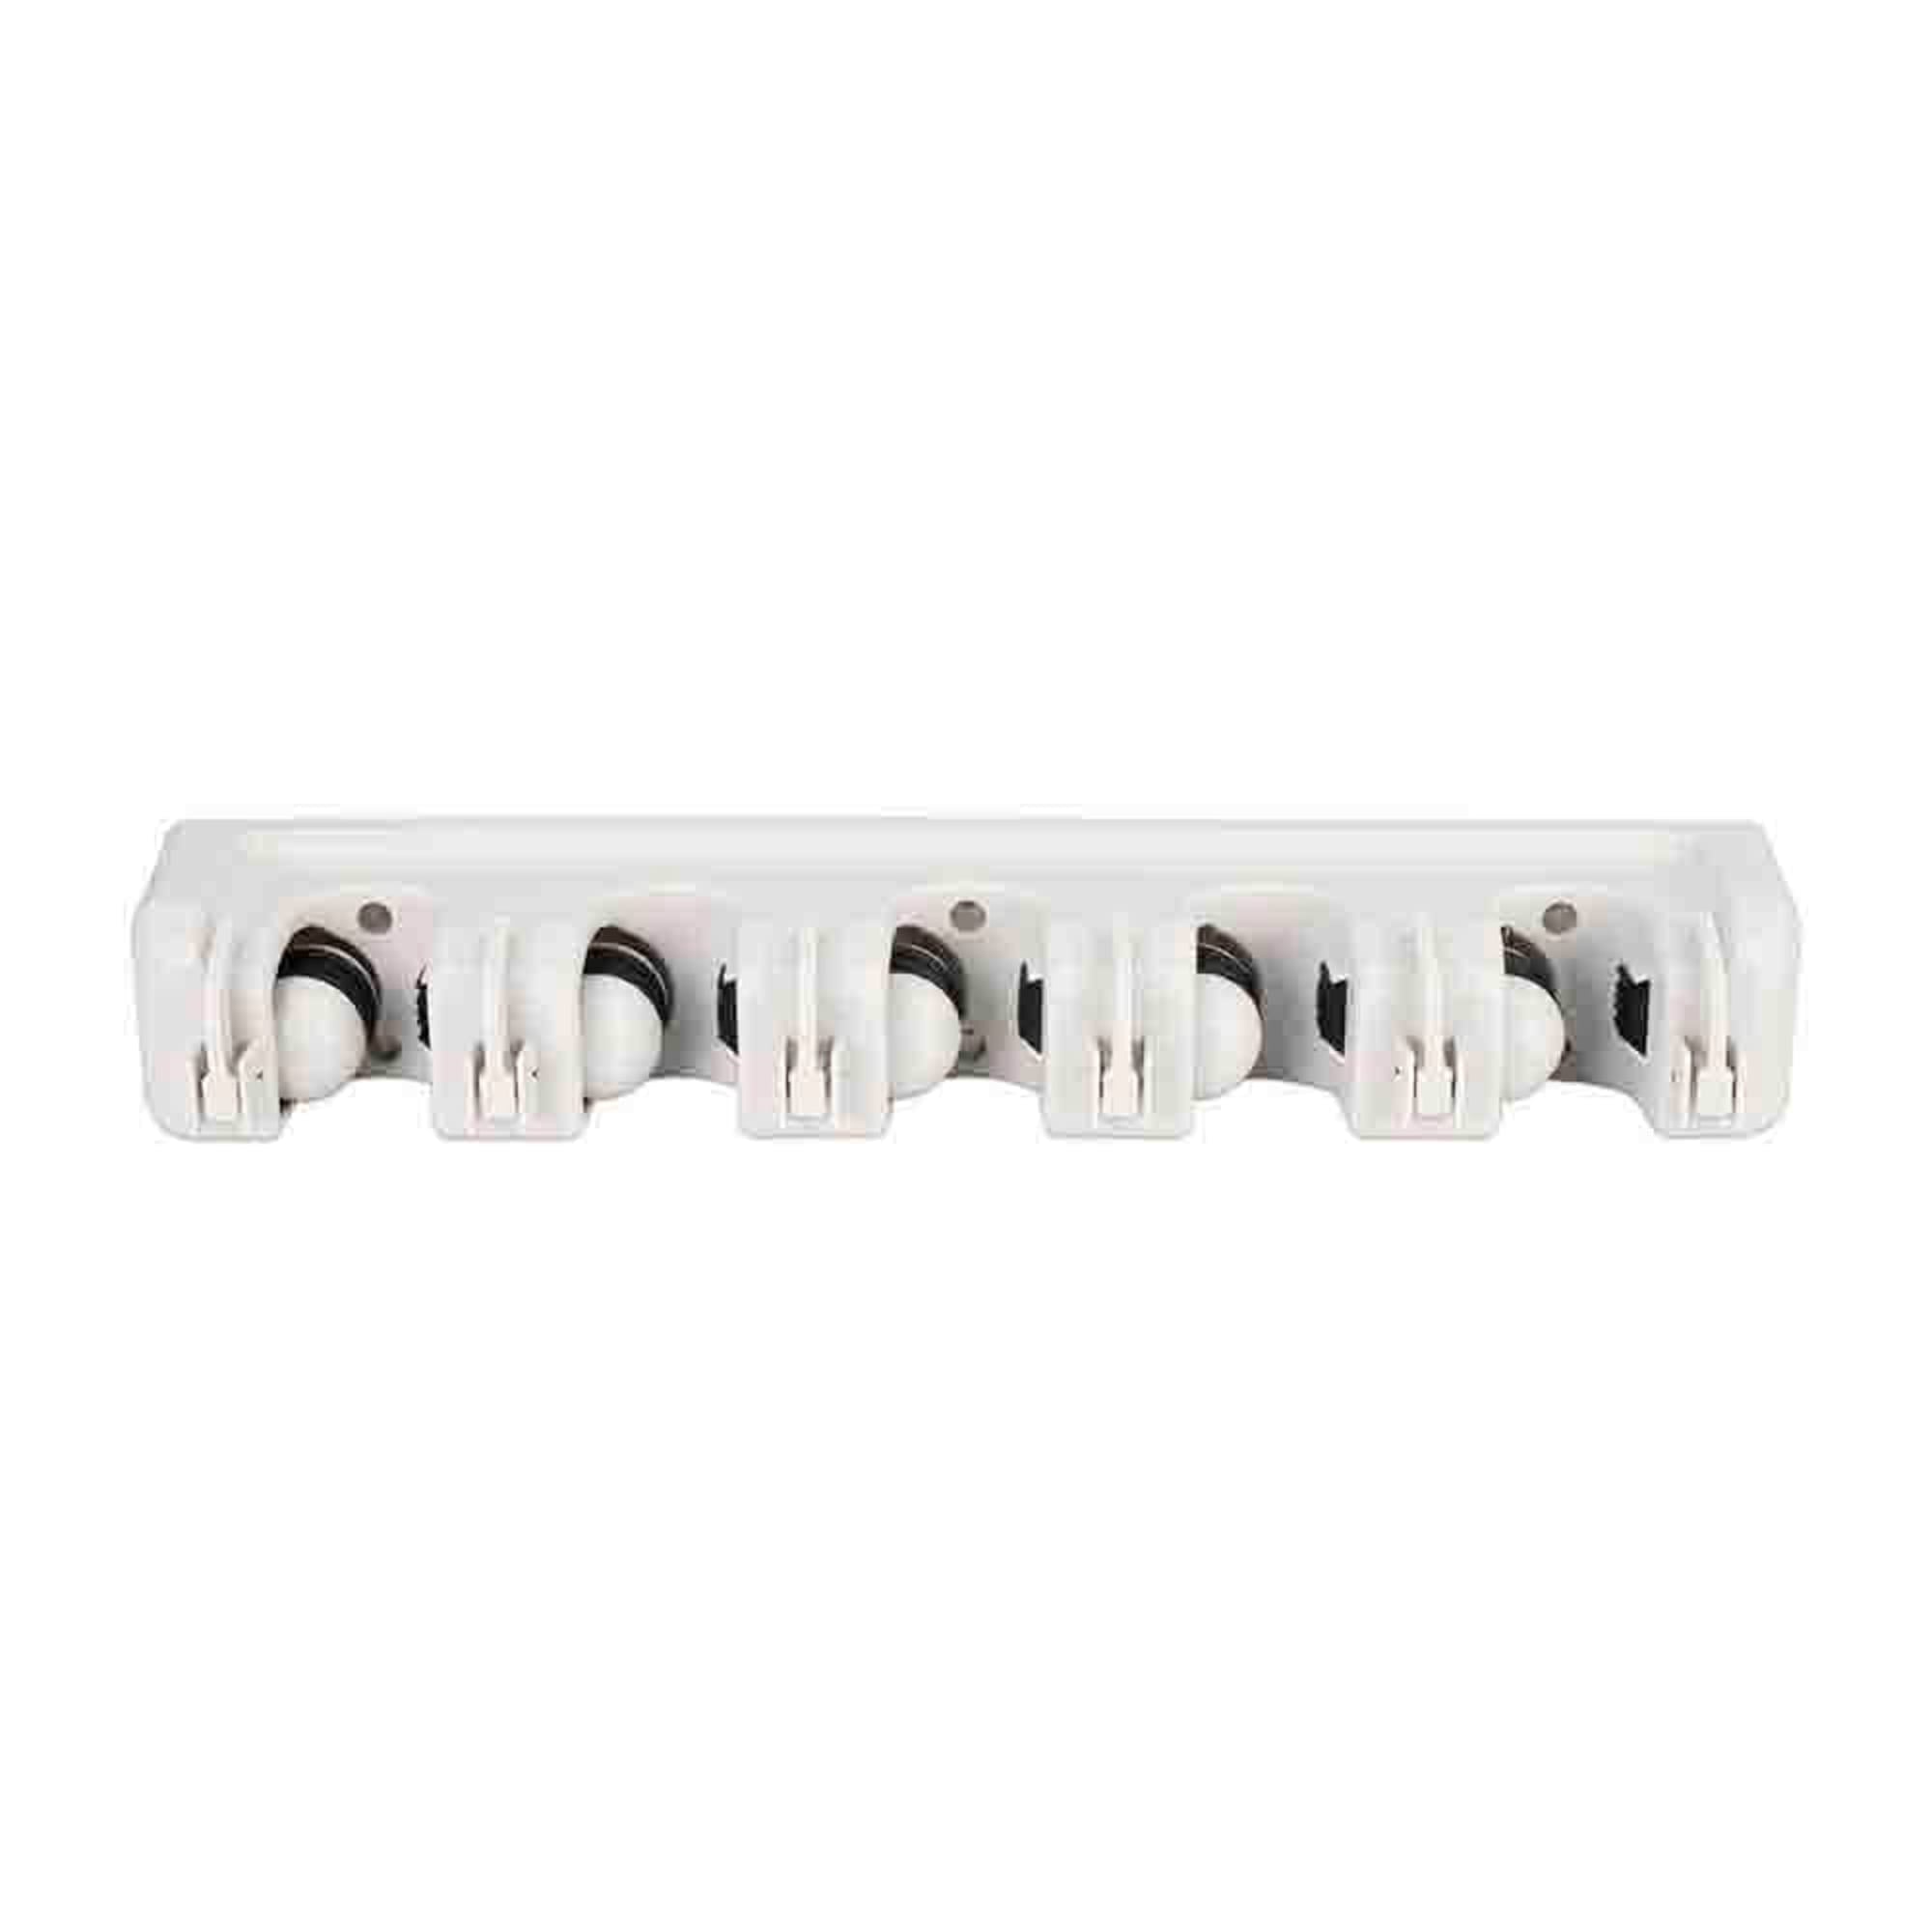 Home Basics Plastic 5 Slot Mop and Broom Organizer, White $6.00 EACH, CASE PACK OF 12